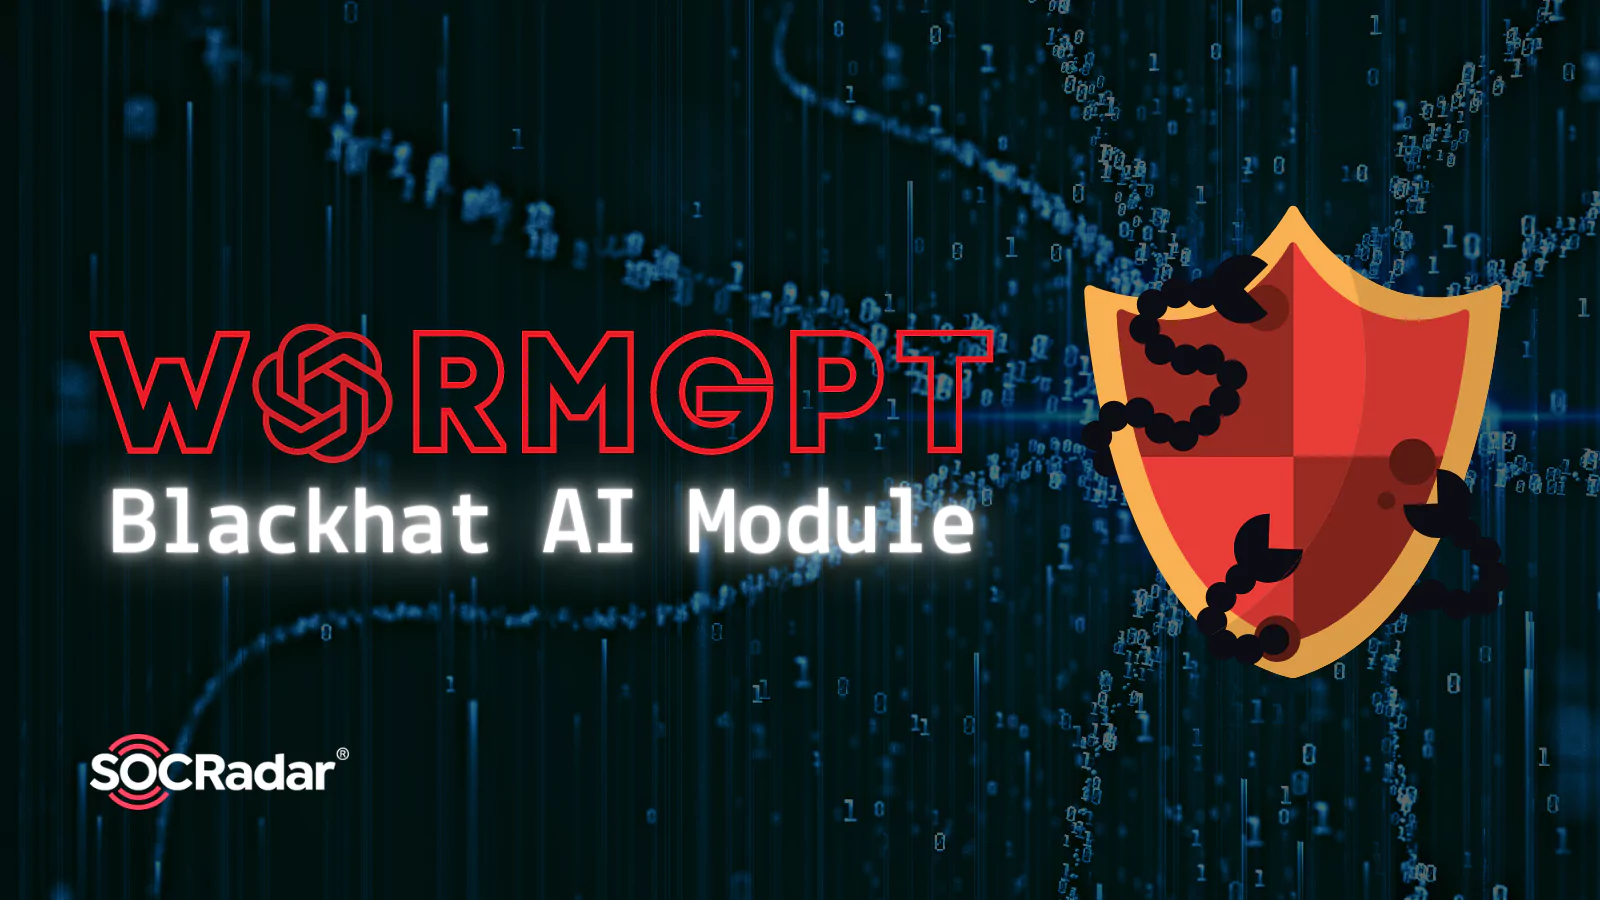 WormGPT Blackhat AI Module Surges to 5,000 Subscribers in Just Few